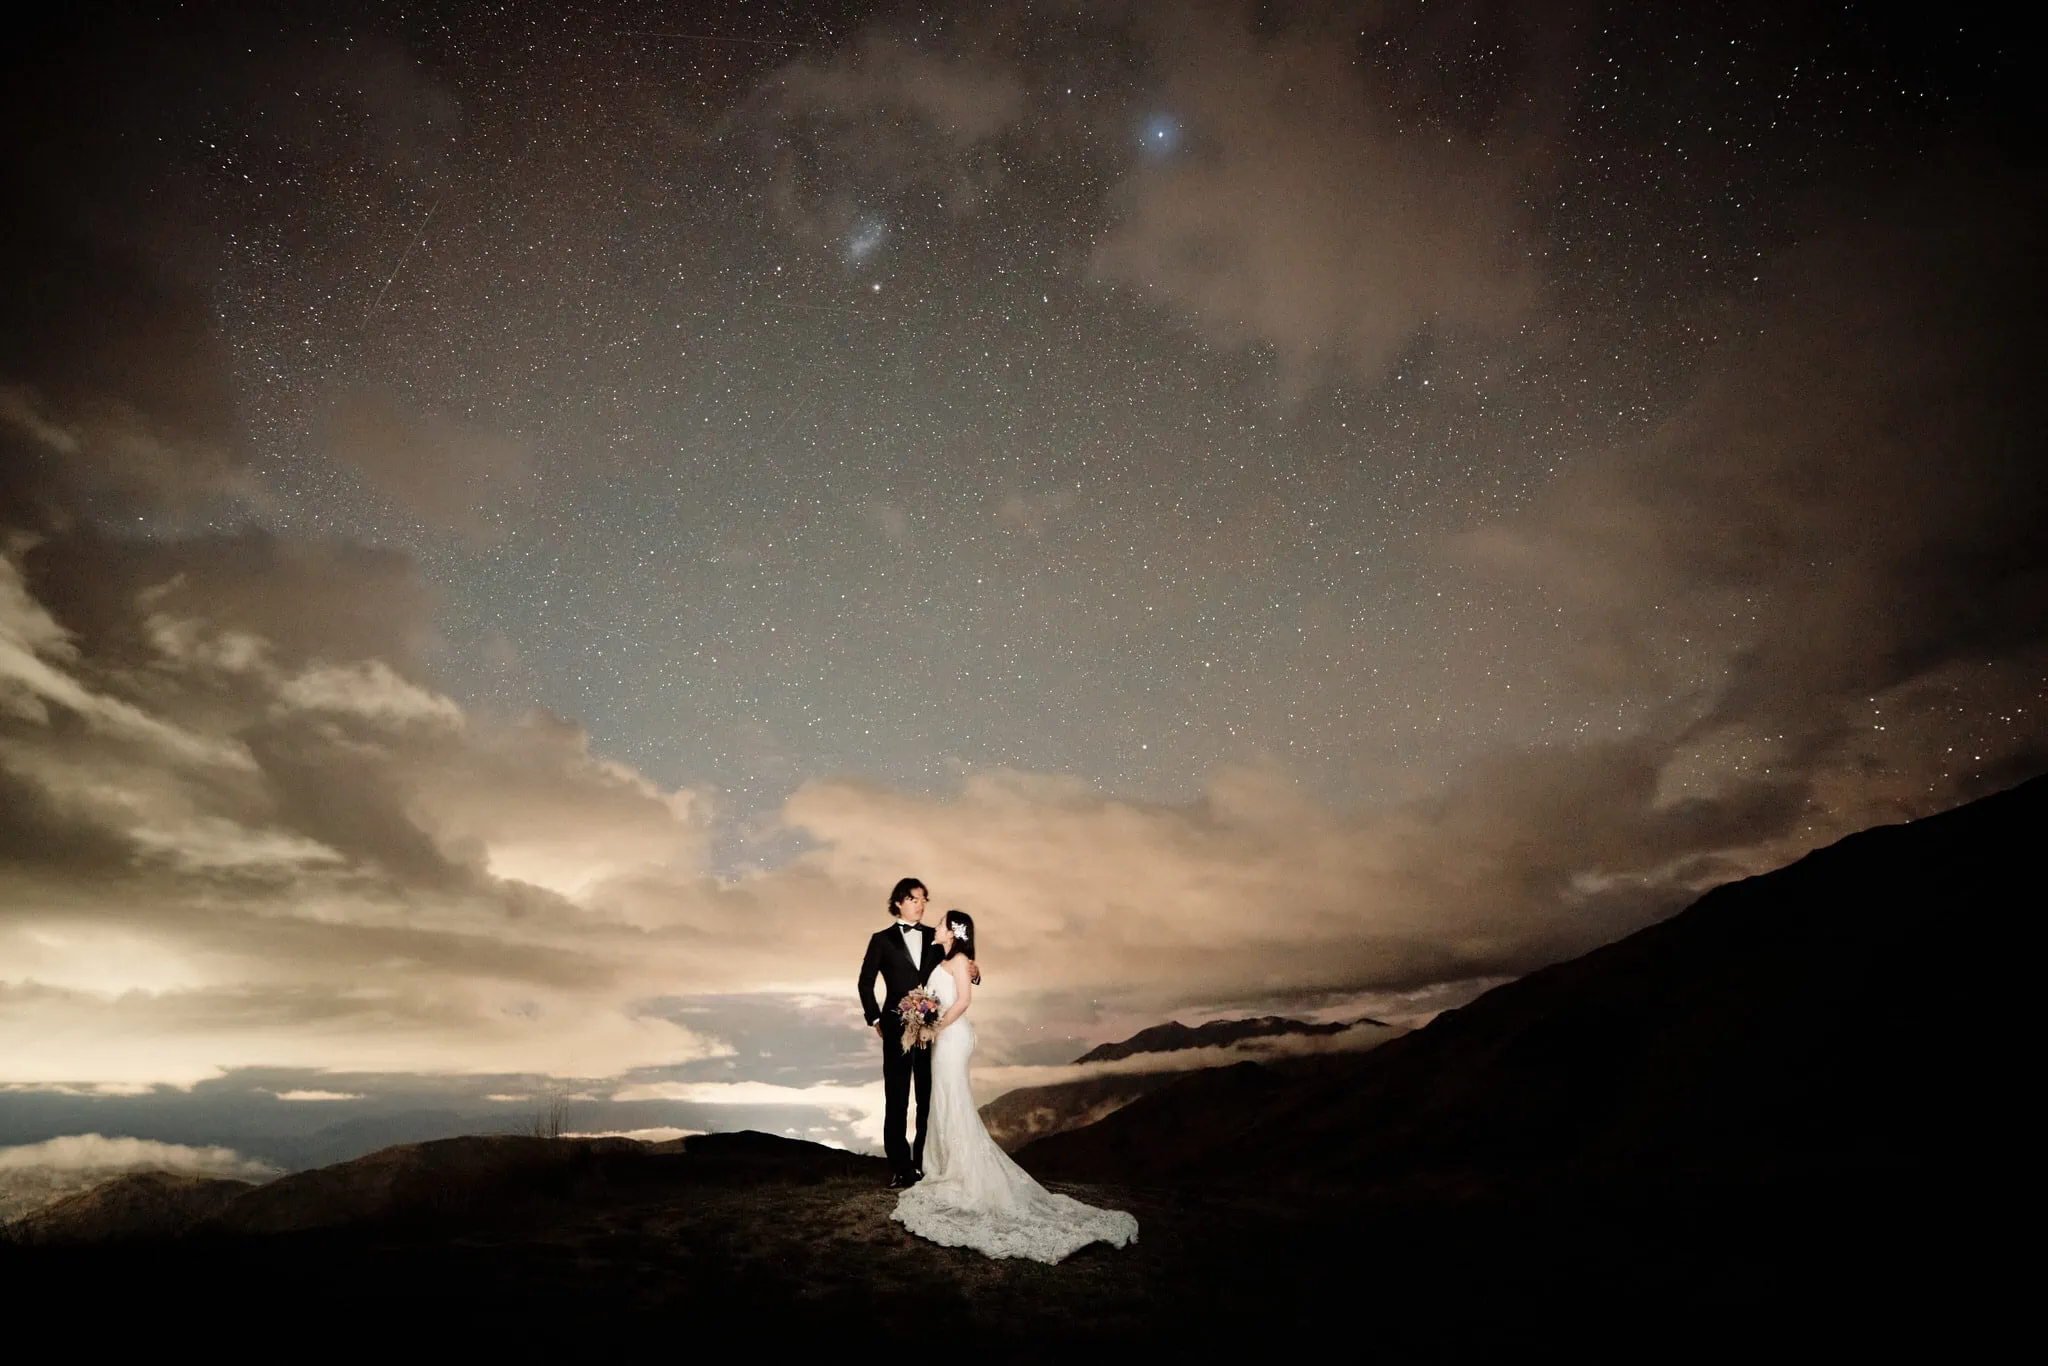 Queenstown New Zealand Elopement Wedding Photographer - A bride and groom standing on top of a mountain under a starry night.